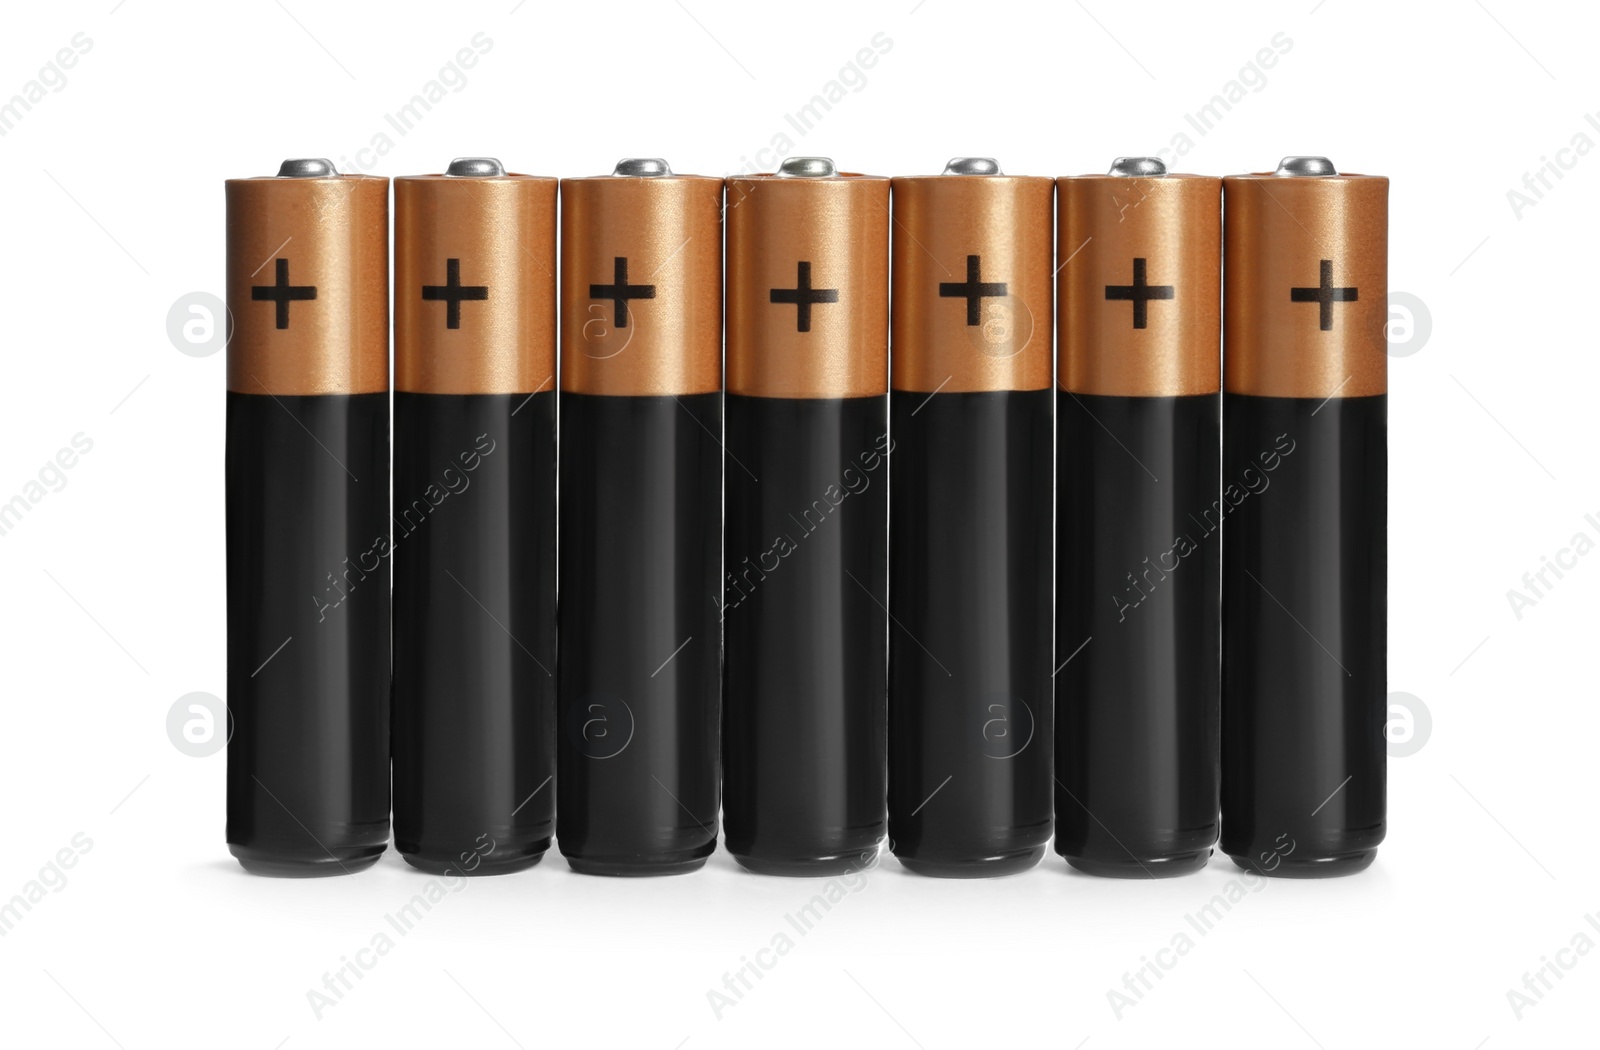 Image of New AAA batteries on white background. Dry cell